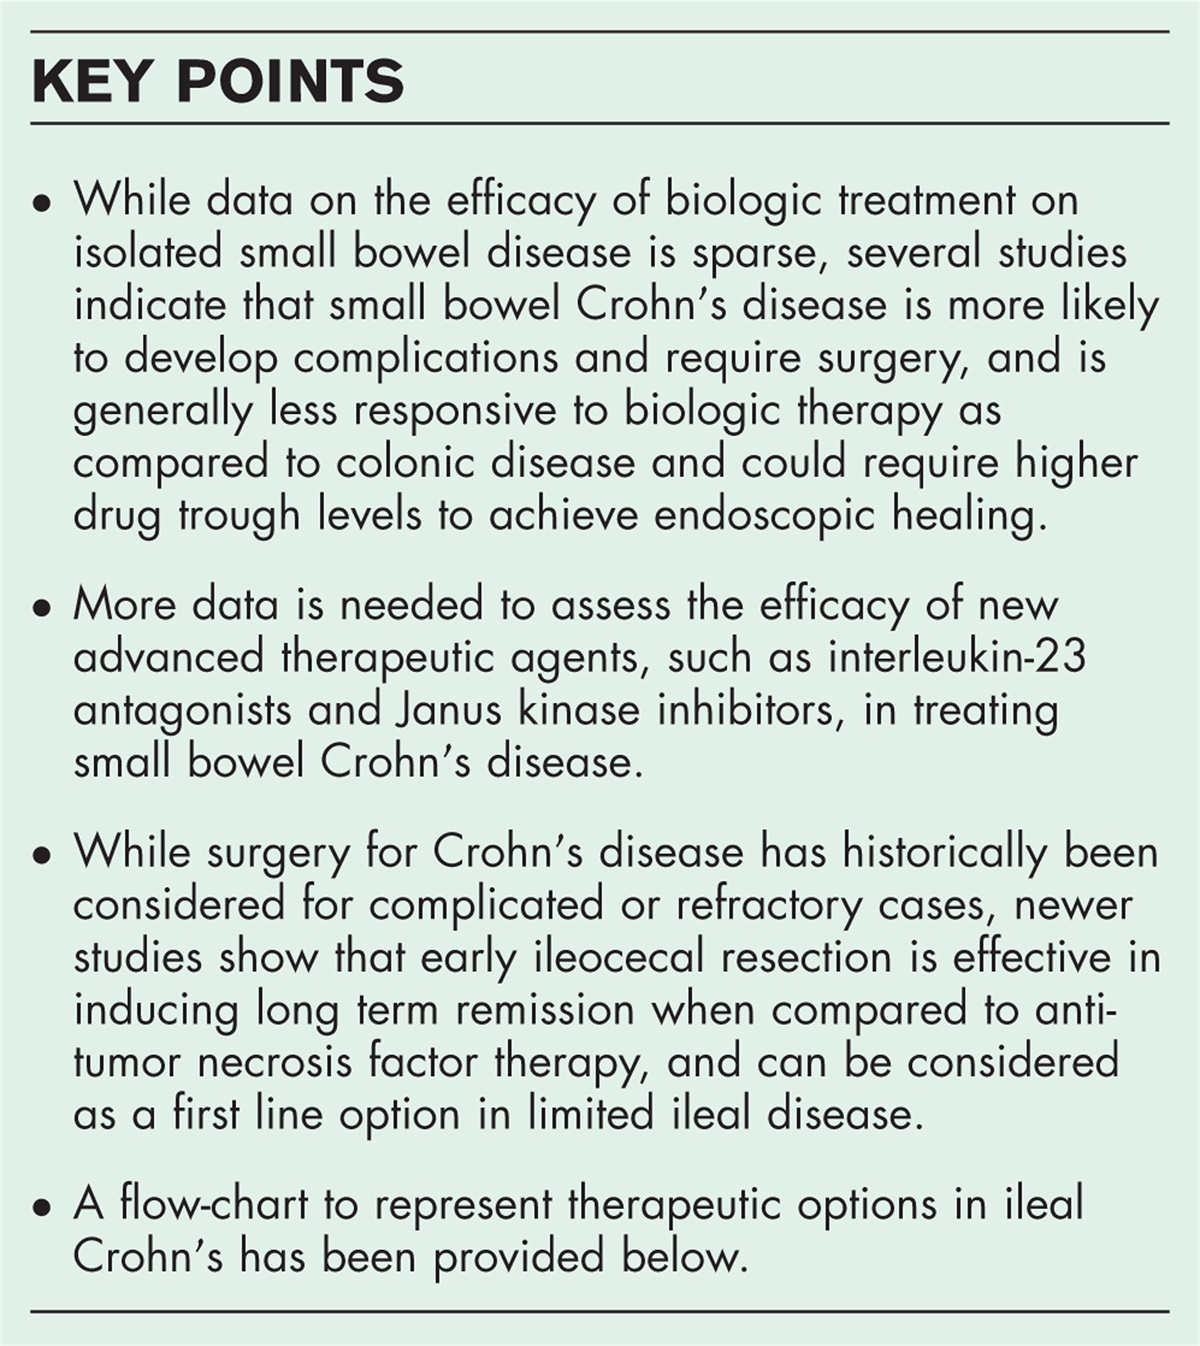 Biologics, small molecule therapies and surgery in small bowel Crohn's disease